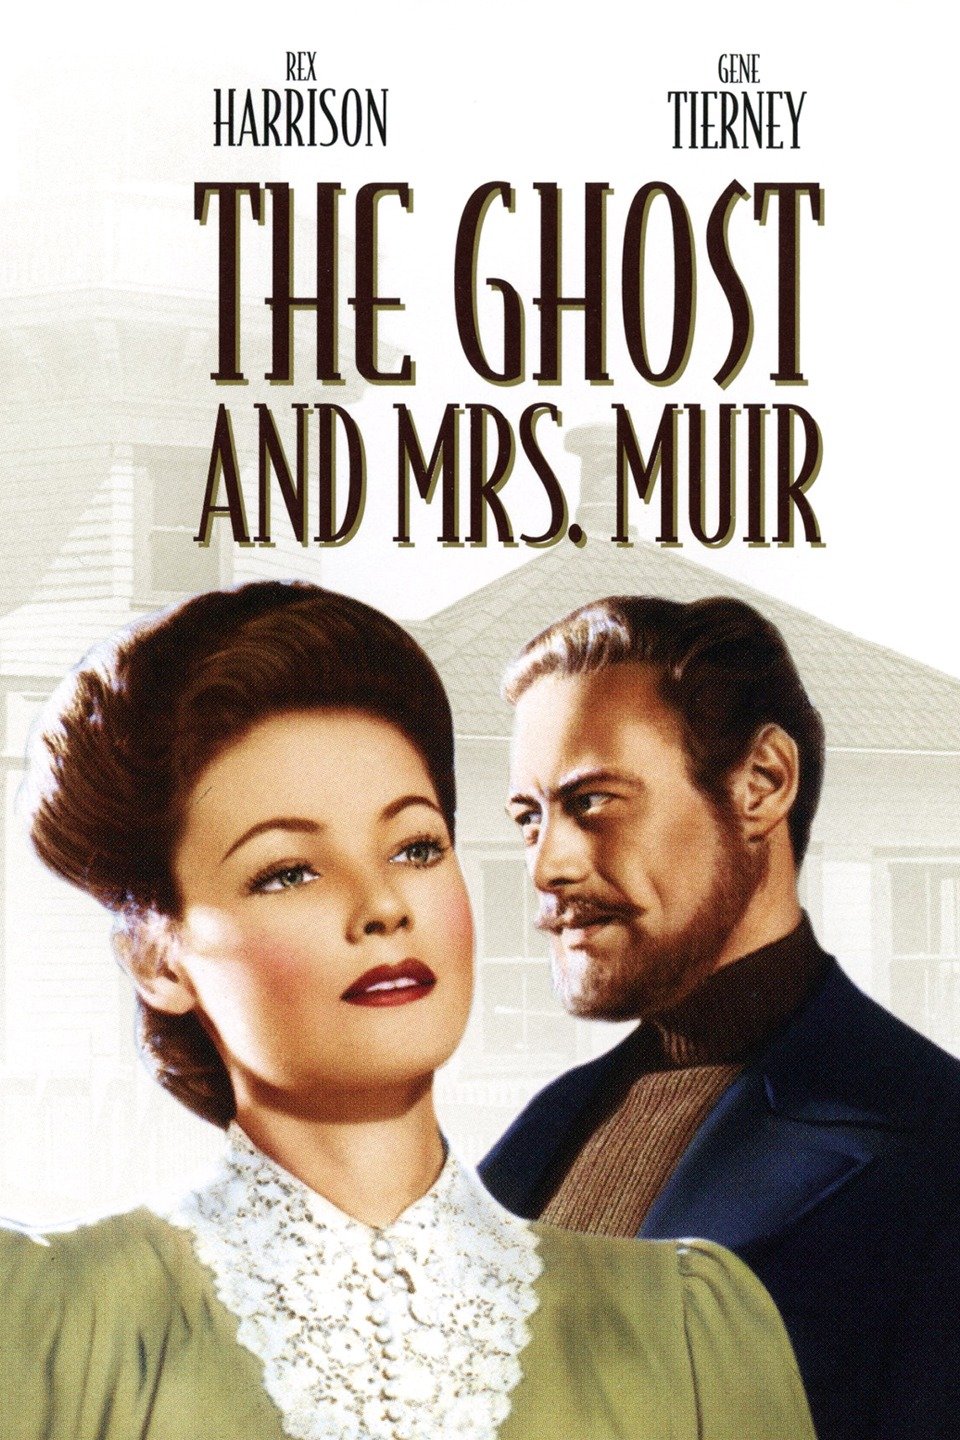 The Ghost and Charlie Muir by Felice Stevens